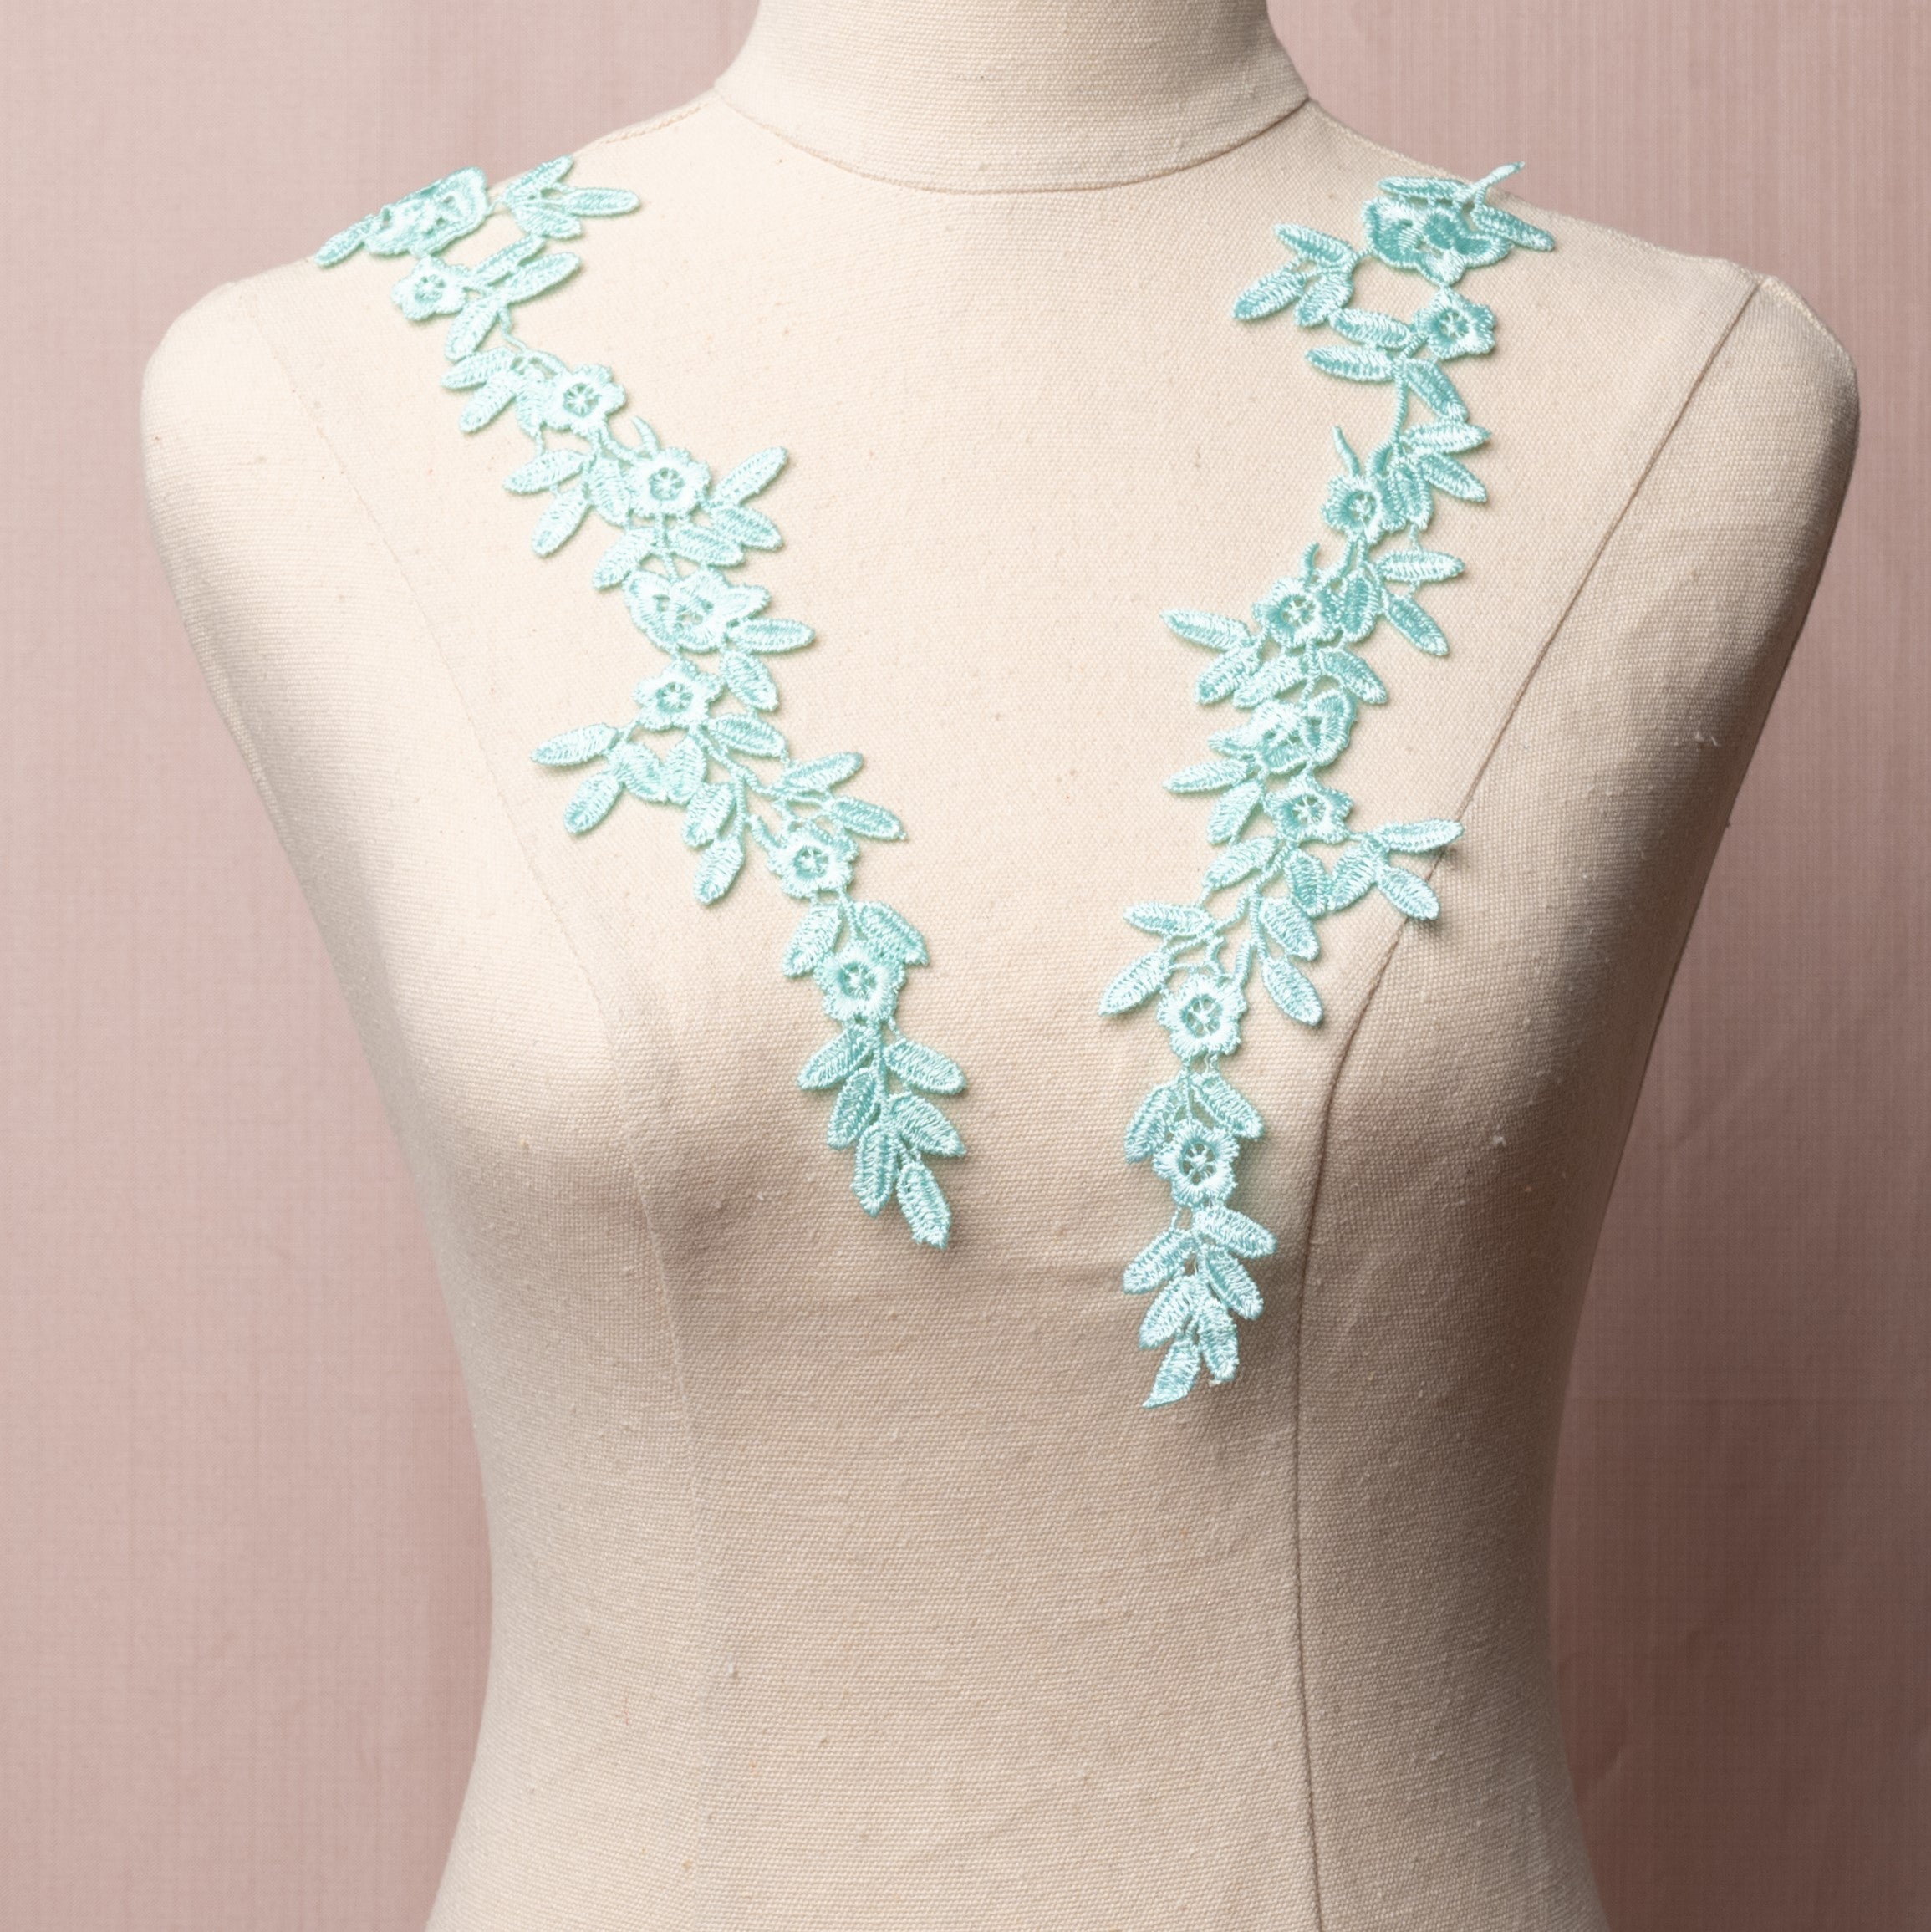 Long, narrow ice green embroidered applique pair with a floral design.  The appliques are displayed on a mannequin.